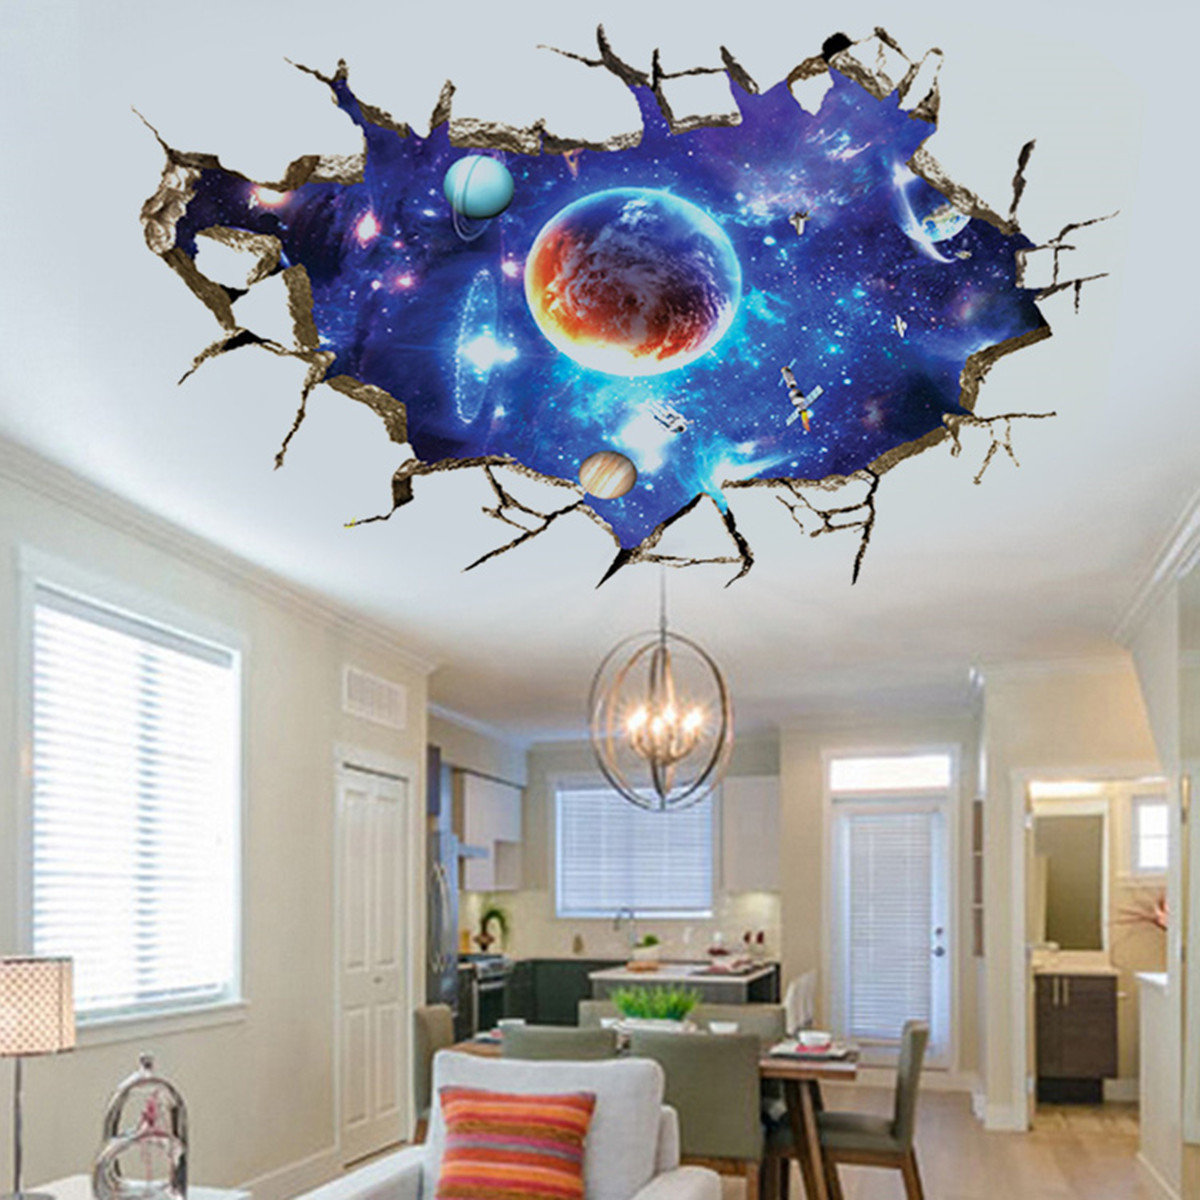 

3D Removable Outer Space Planet Wall Stickers Waterproof Home Decor